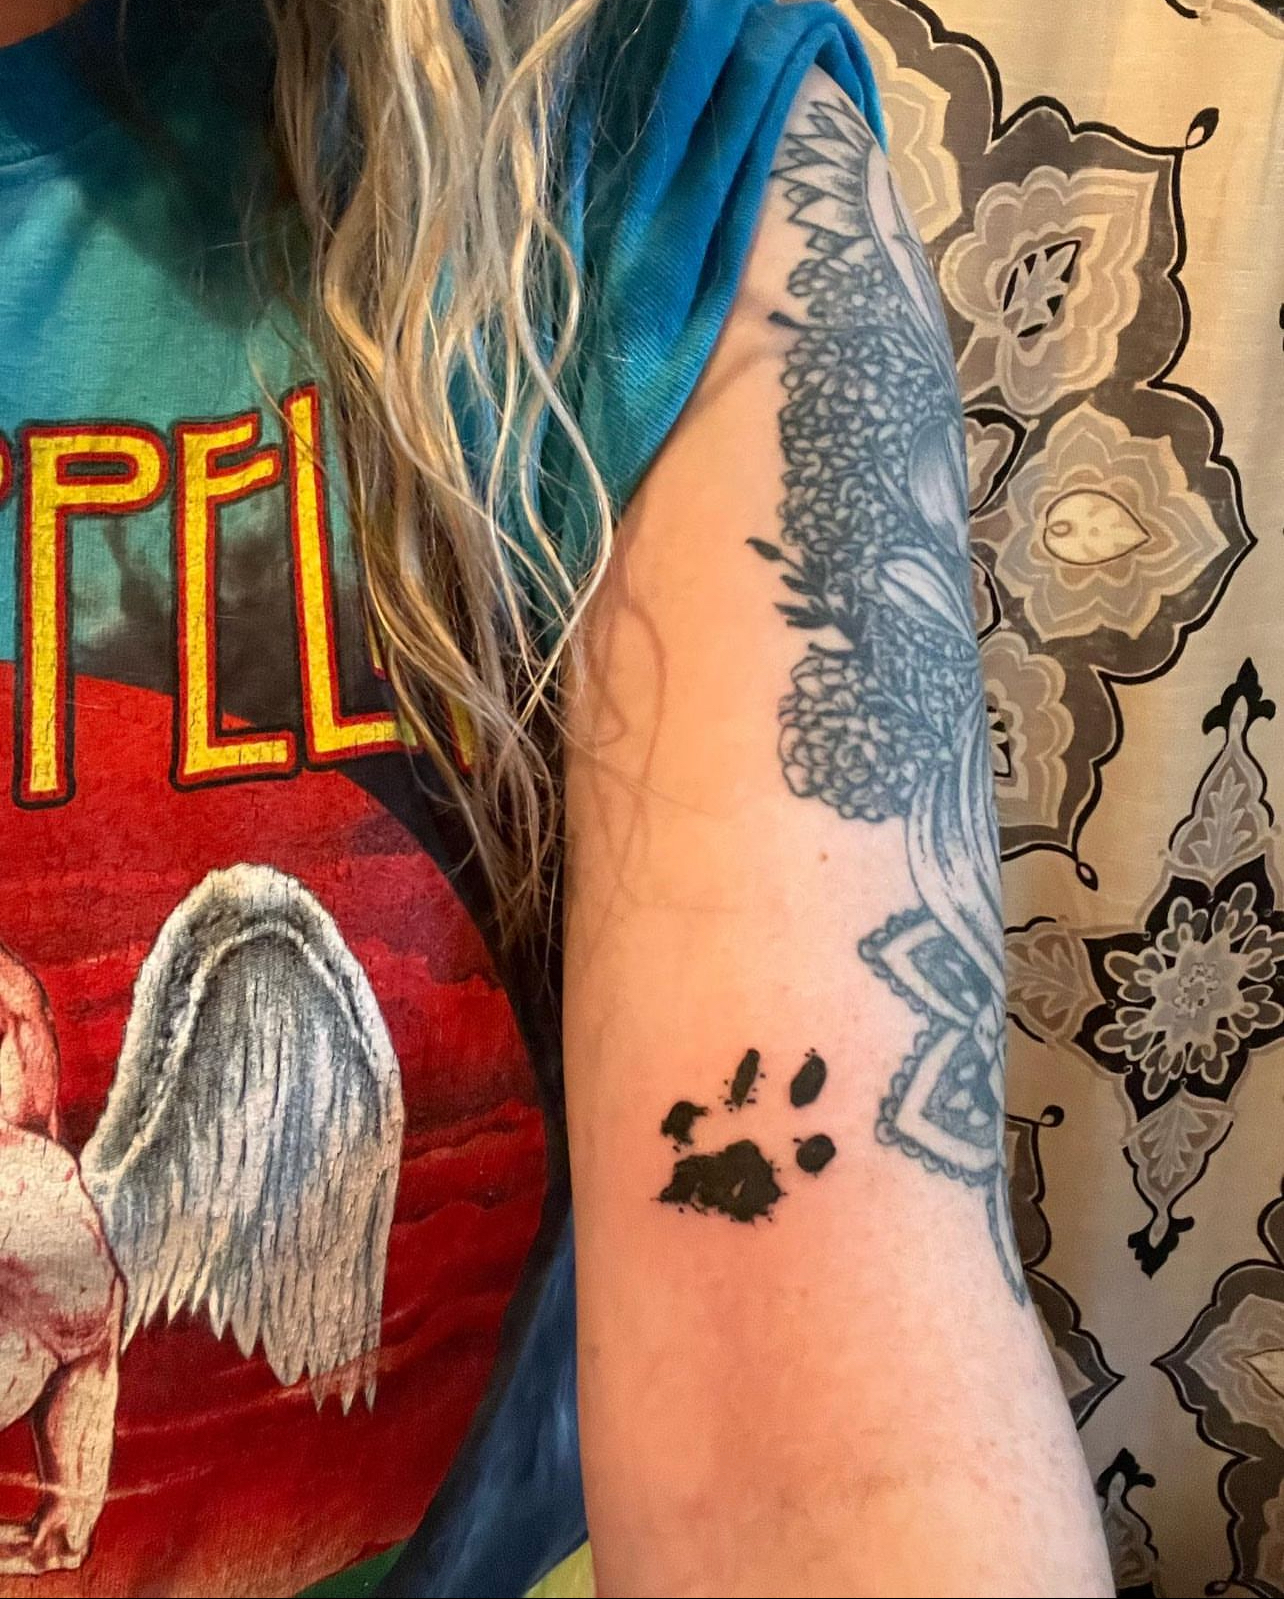 Goat's pawprint will forever be with me